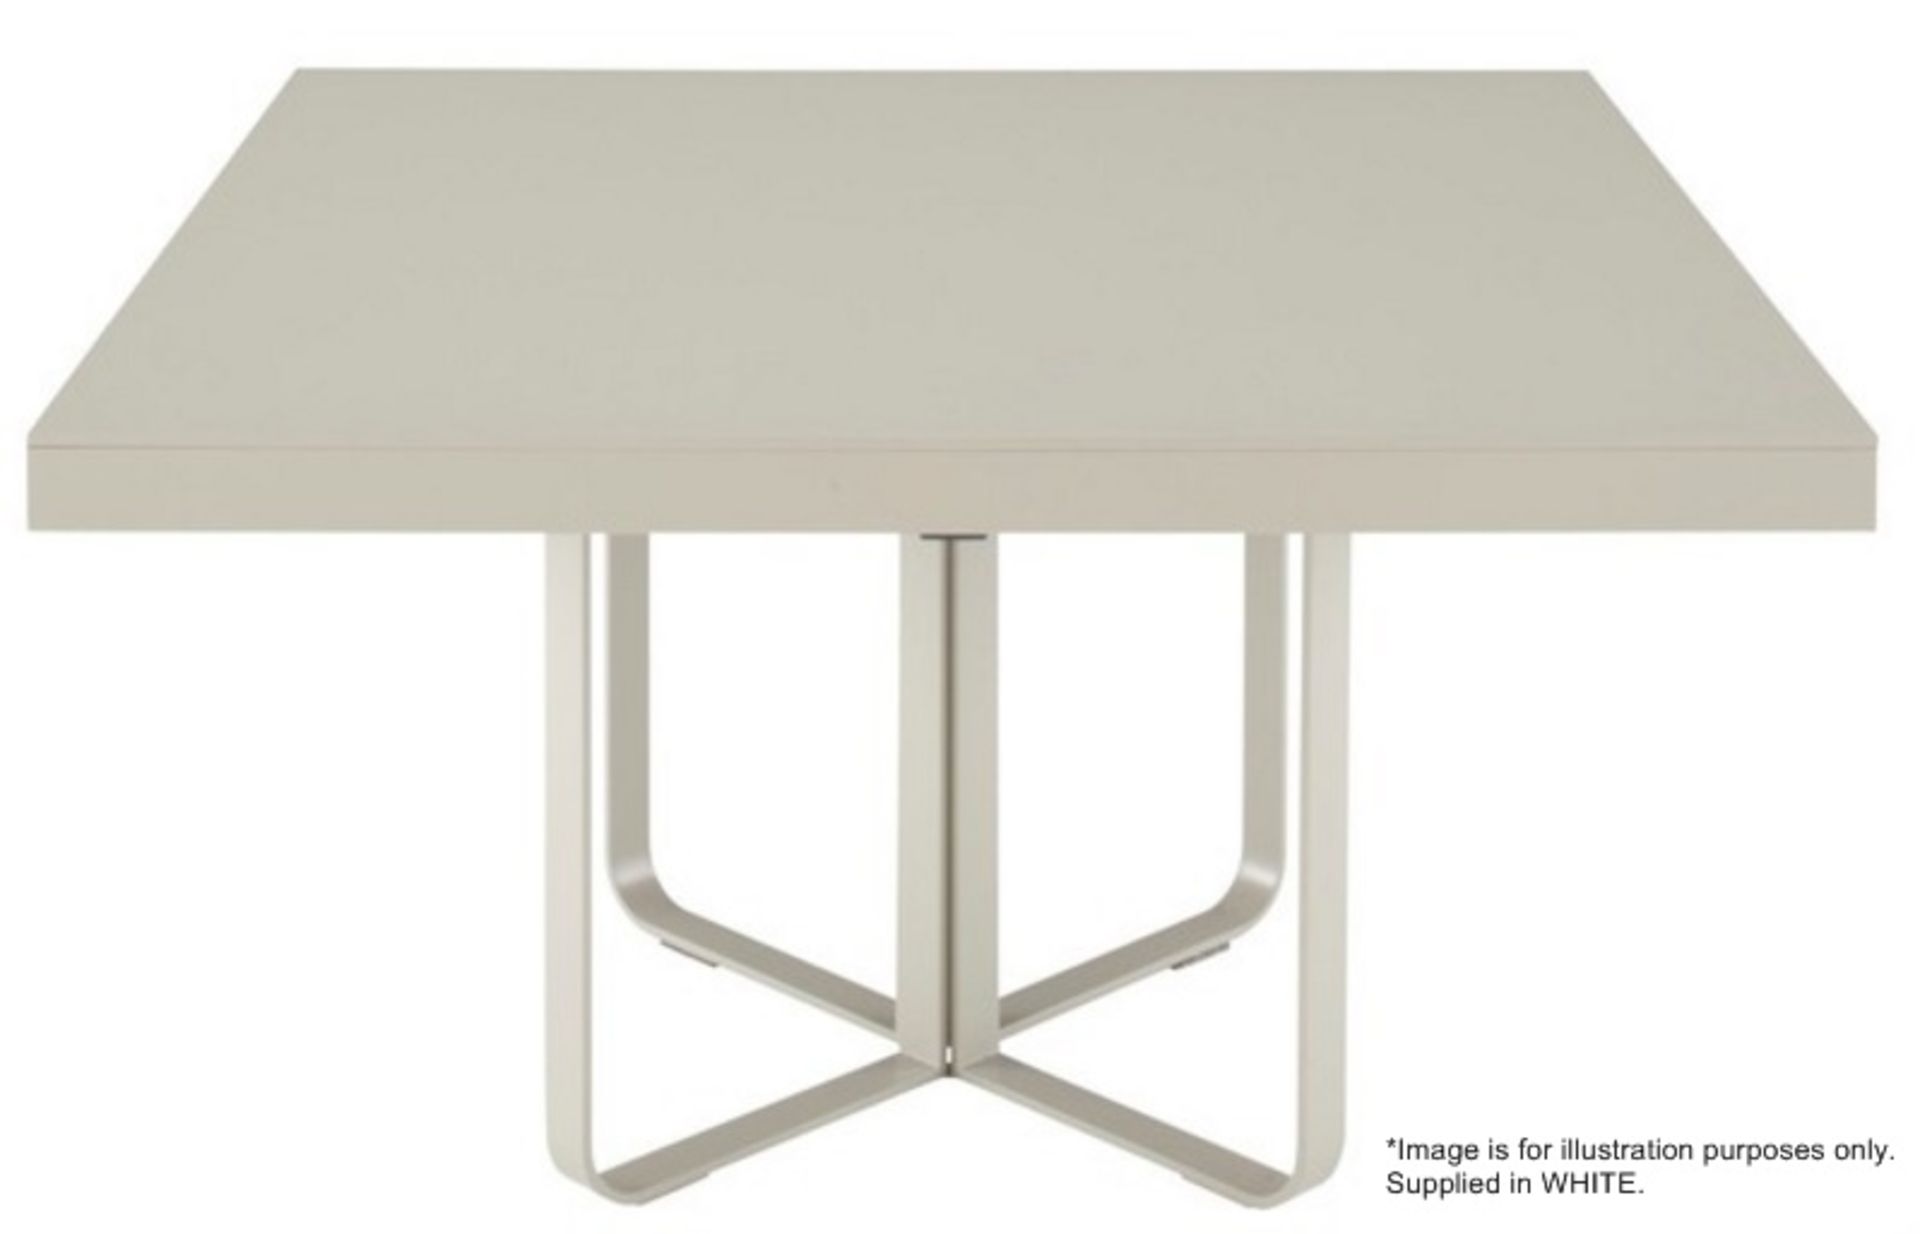 1 x LIGNE ROSET "Ava"  Square Dining Table With Fold Extension - Over 2 Metres In Length - Colour: